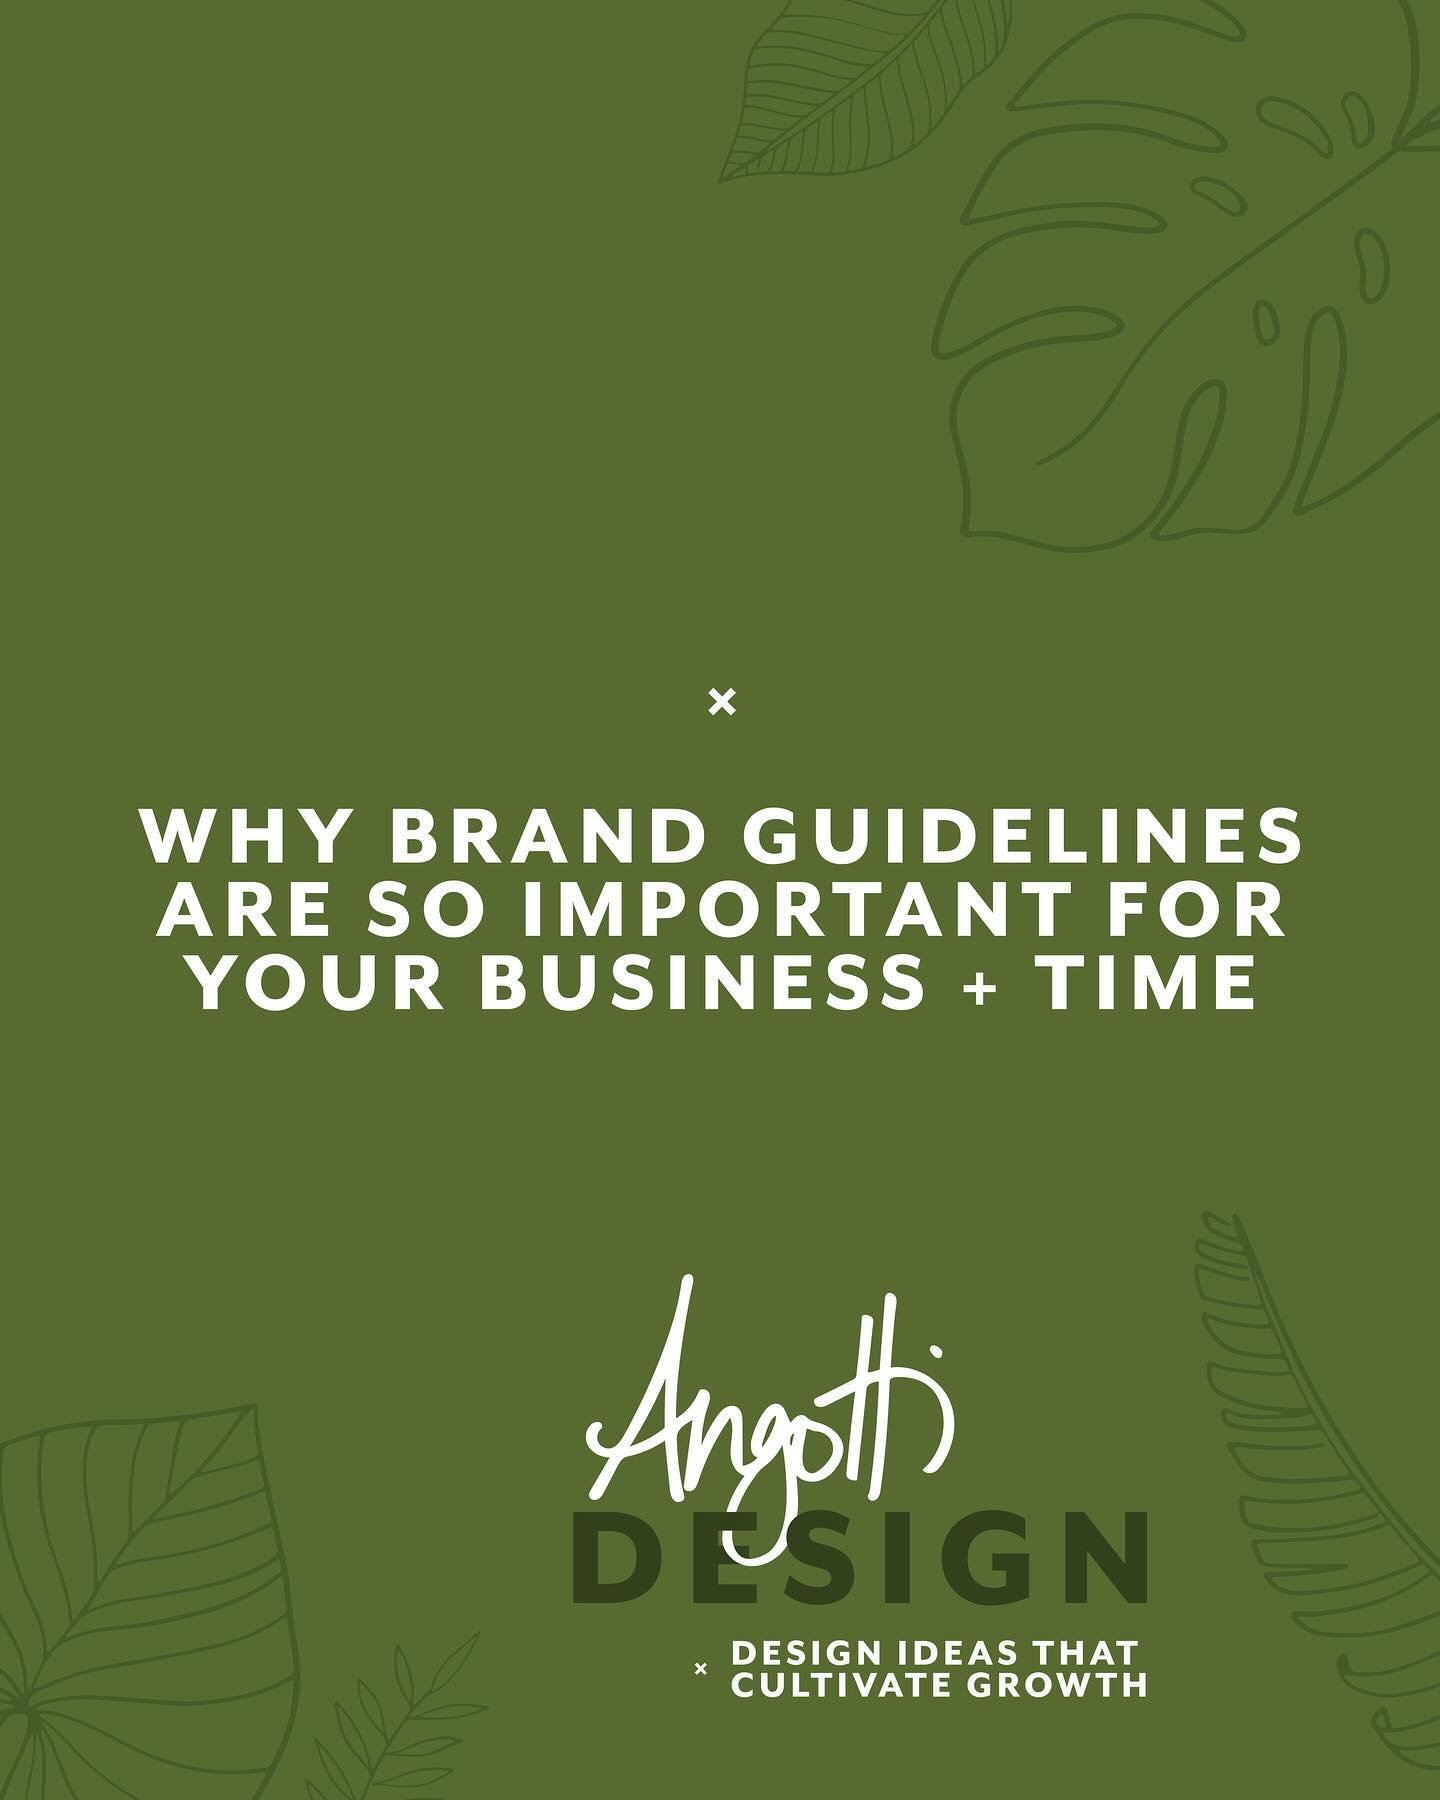 Having brand guidelines saves your business time and time equals money, baby! ⌚️💰

Having readily available brand guidelines for your branding will help you in these 5 areas&hellip;

1️⃣ brand consistency - making sure the exact colors, fonts, logo,